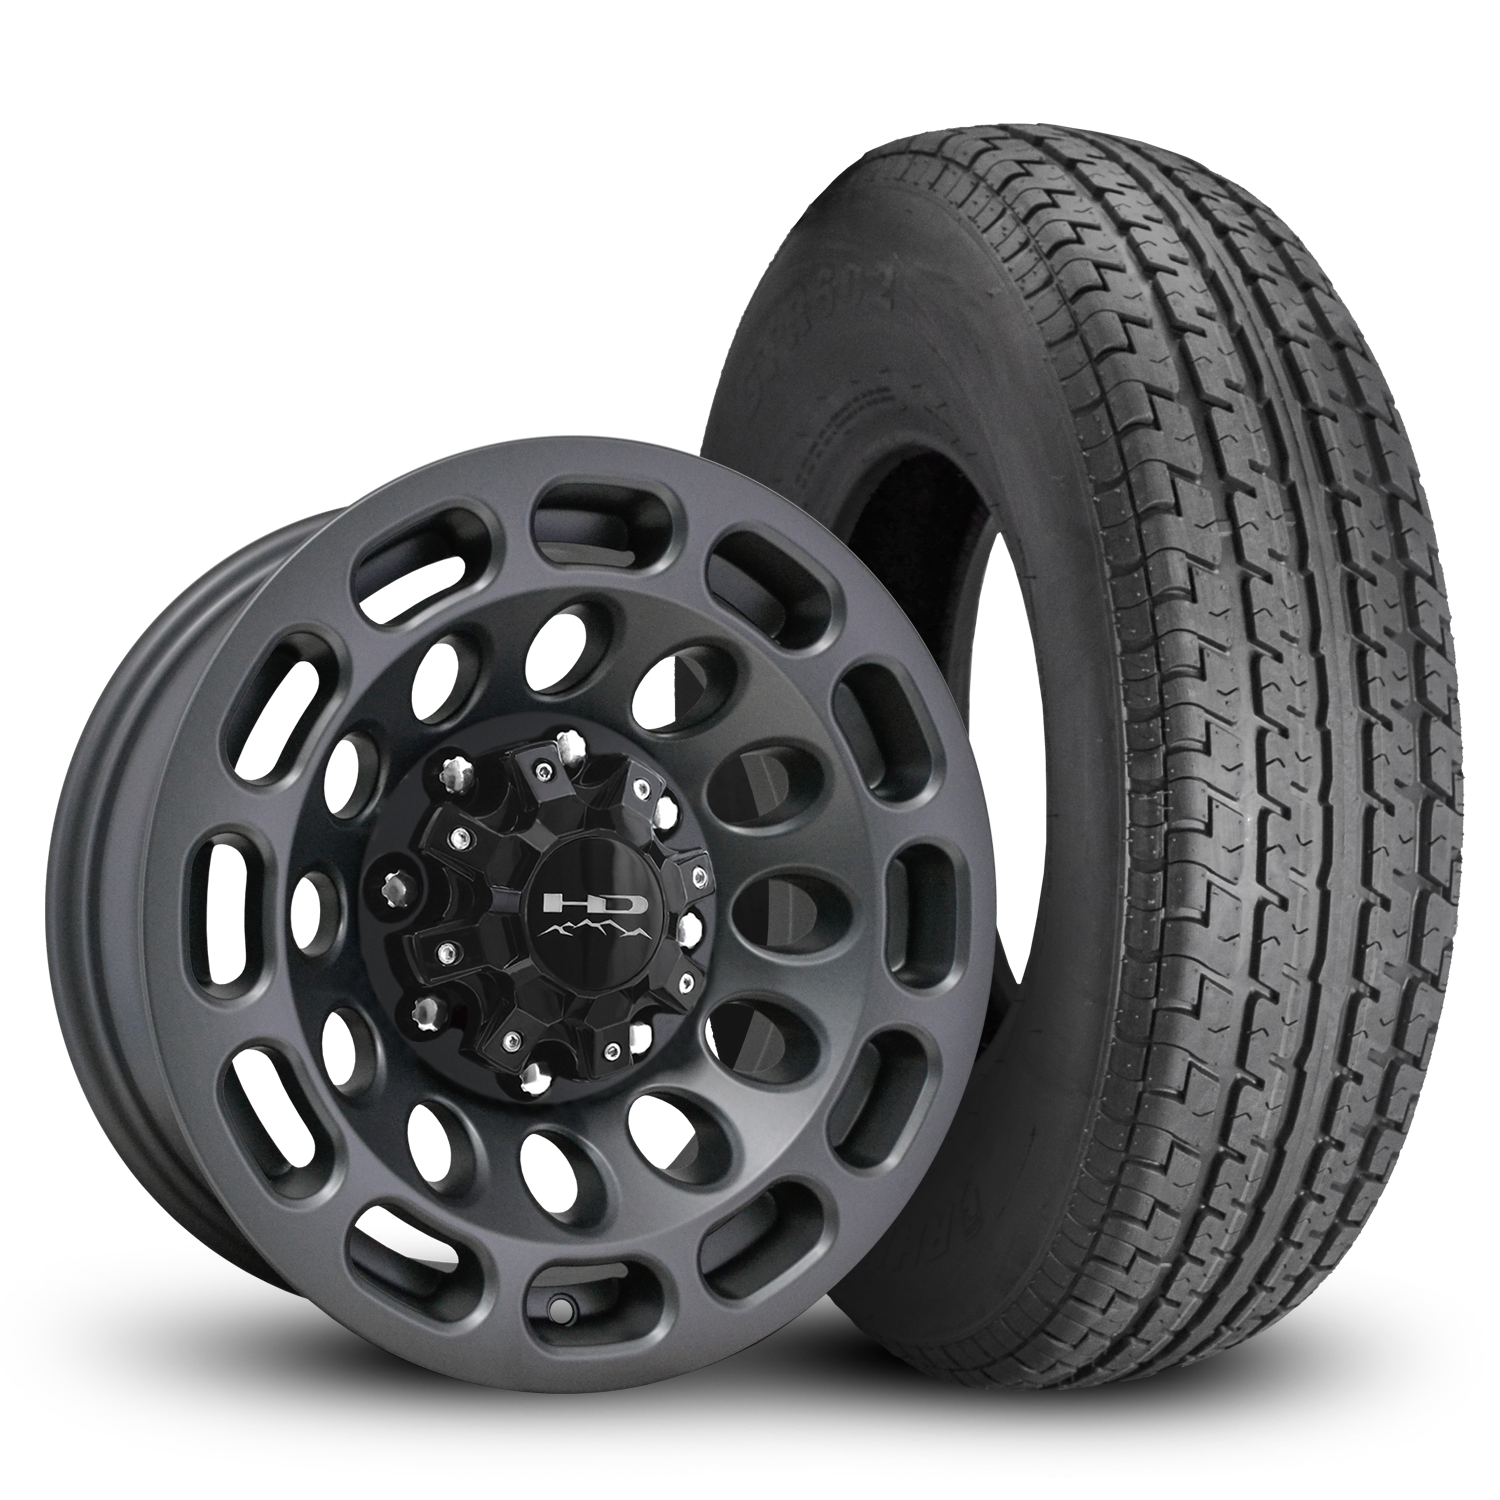 HD Off-Road Road Warrior Custom Trailer Wheel & Tire packages in 16x6.0 in 8 lug All Satin Grey for Unility, Boat, Car, Construction, Horse, & RV